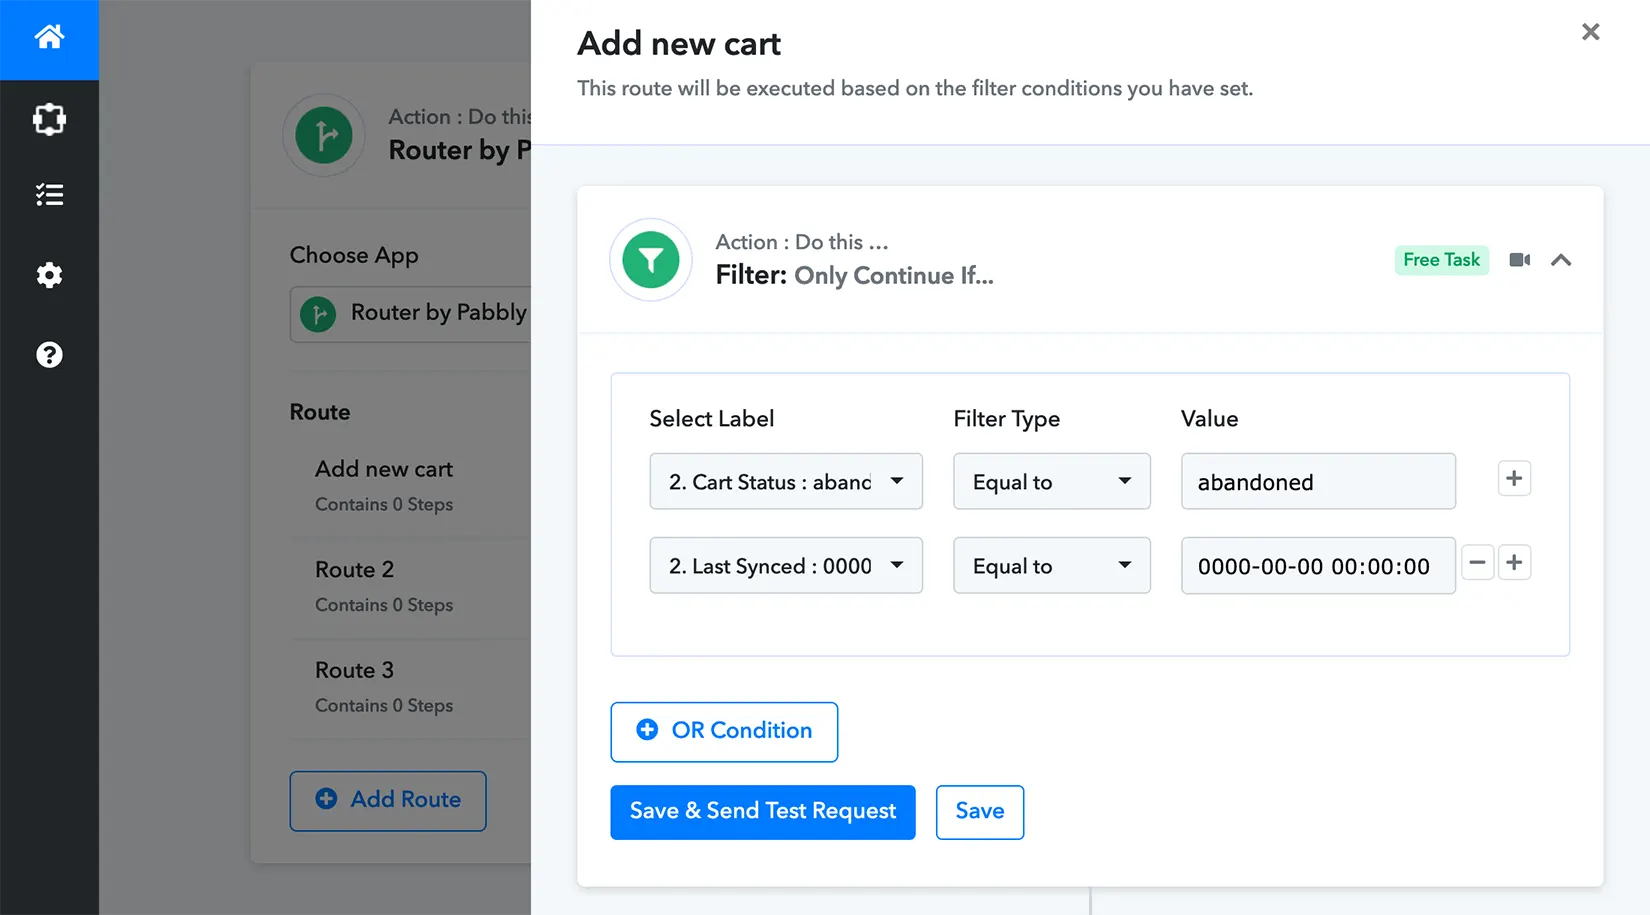 Filter conditions for the "Add new cart" route inside Pabbly